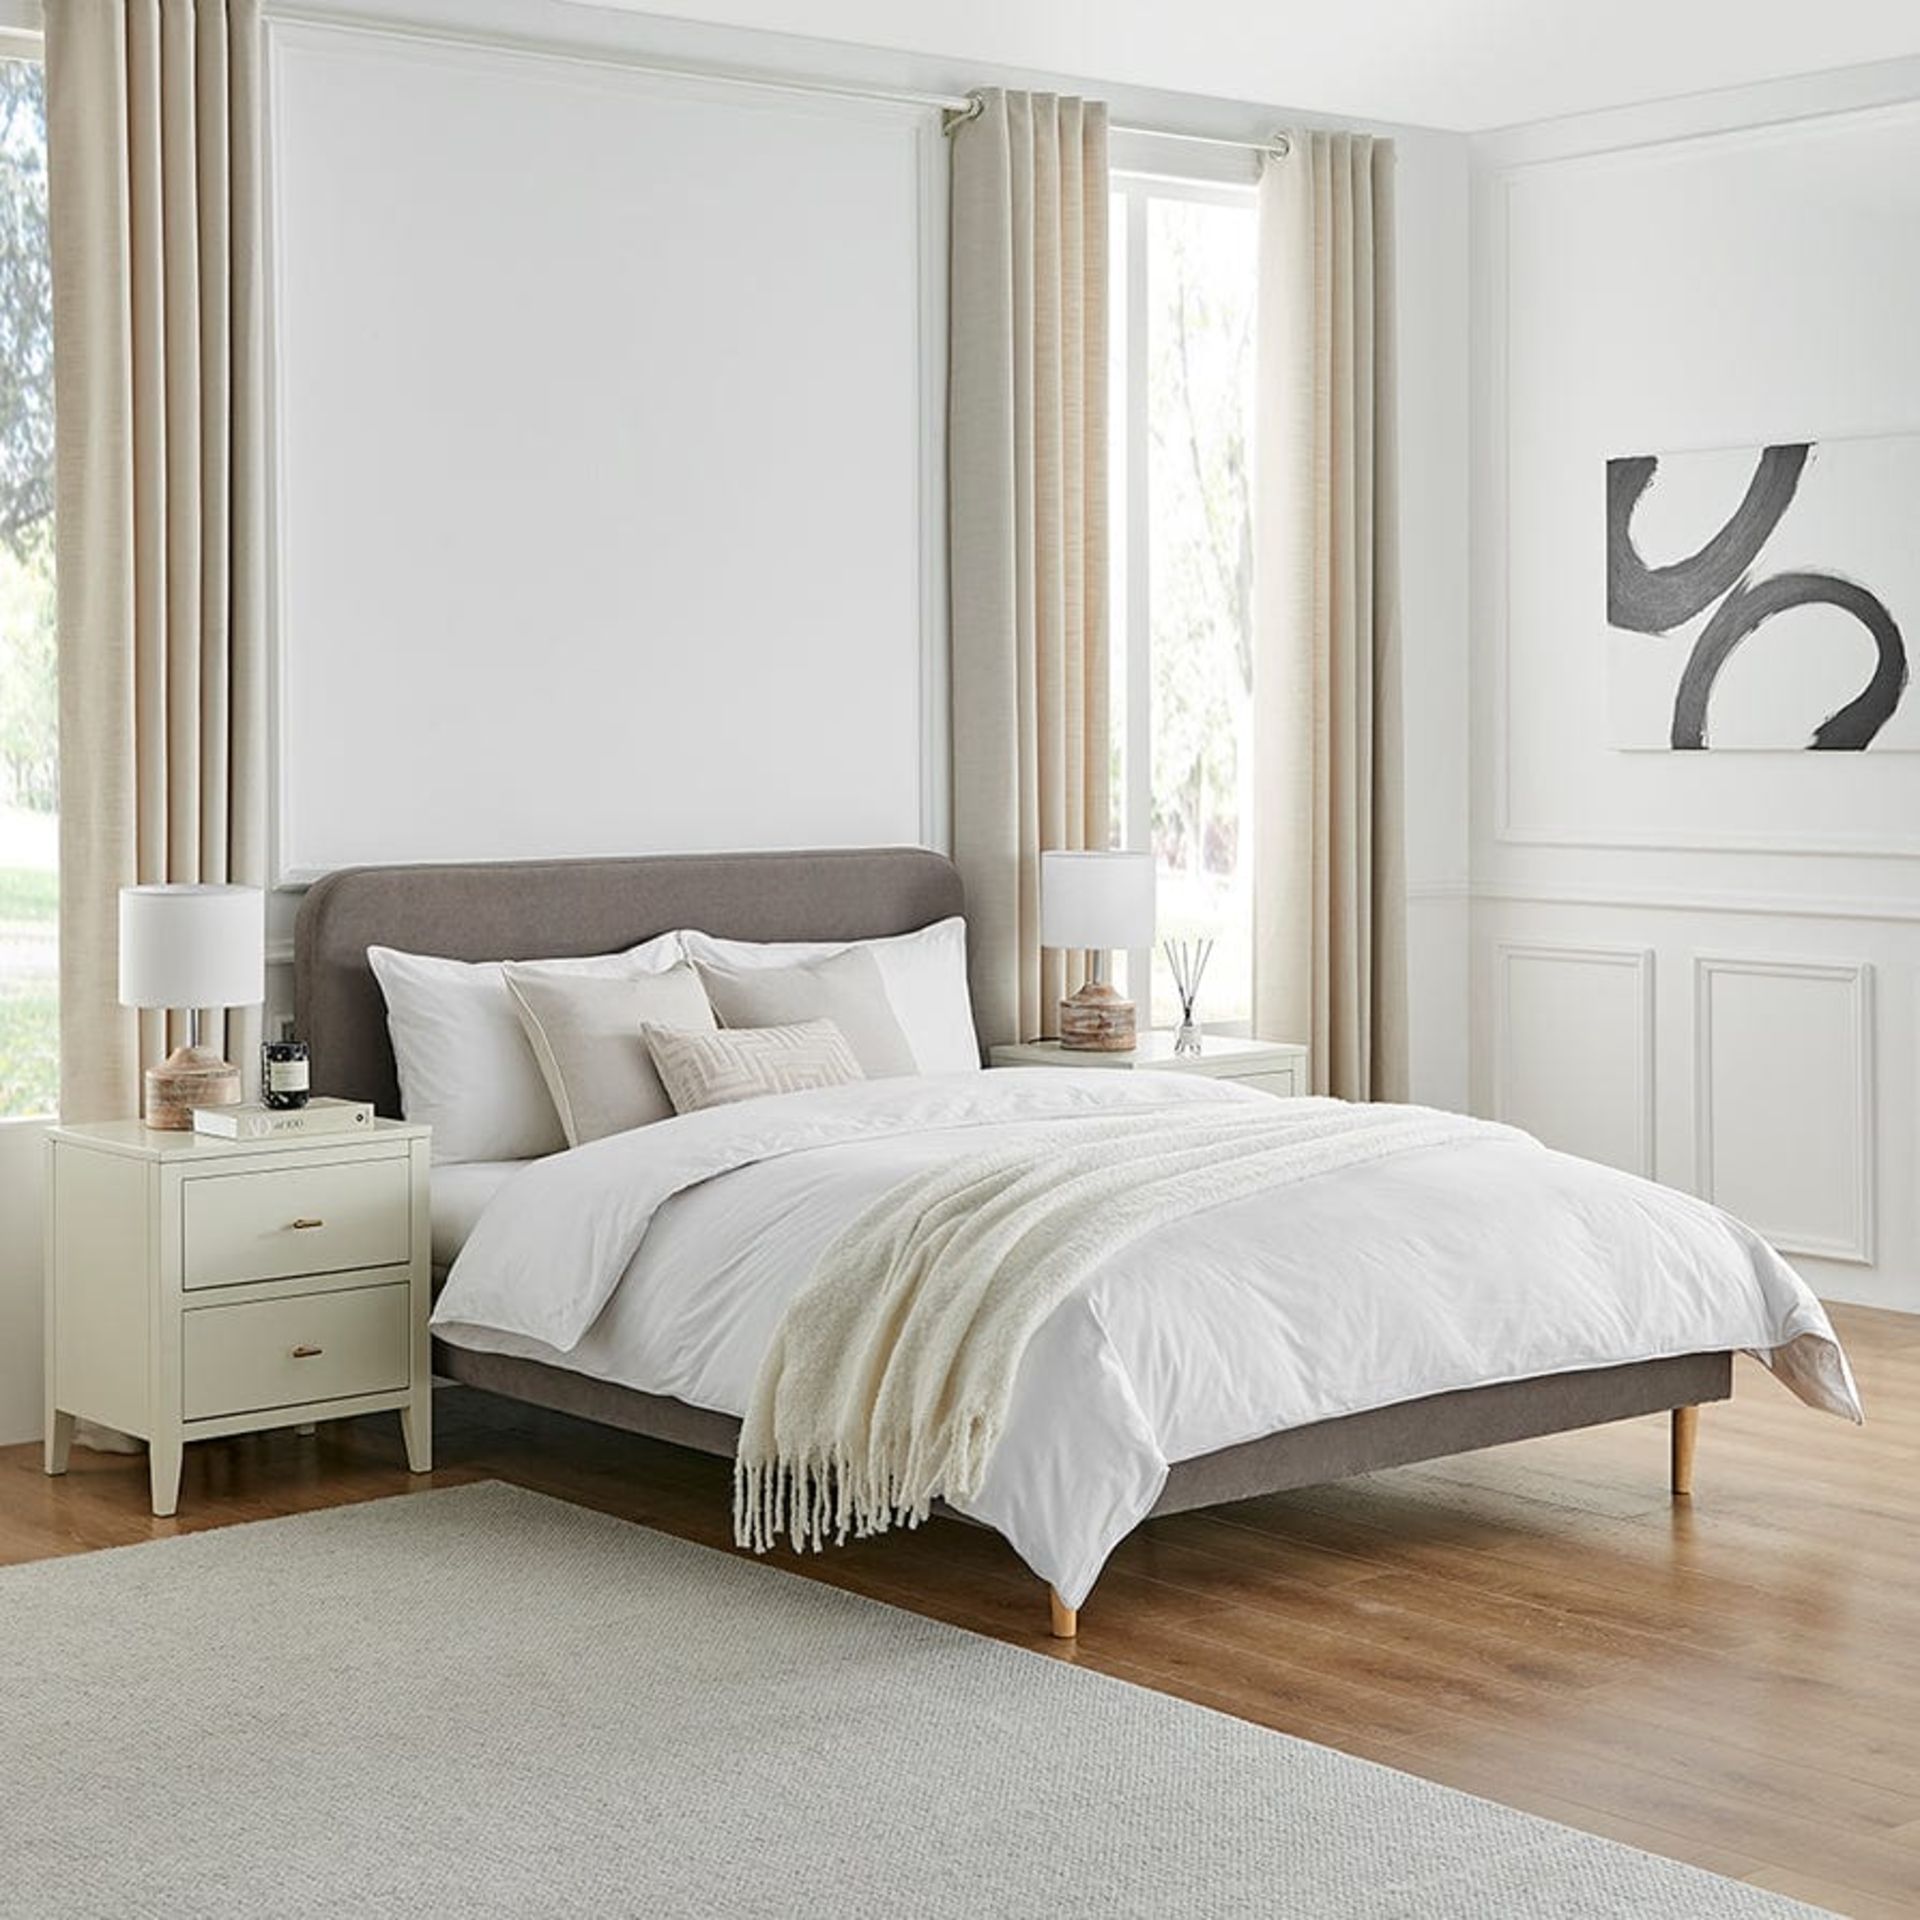 Dusk Ascot (Henley) Bed Frame Bed Double Cool Taupe RRP 379About the Product(s)Ascot Henley Bed